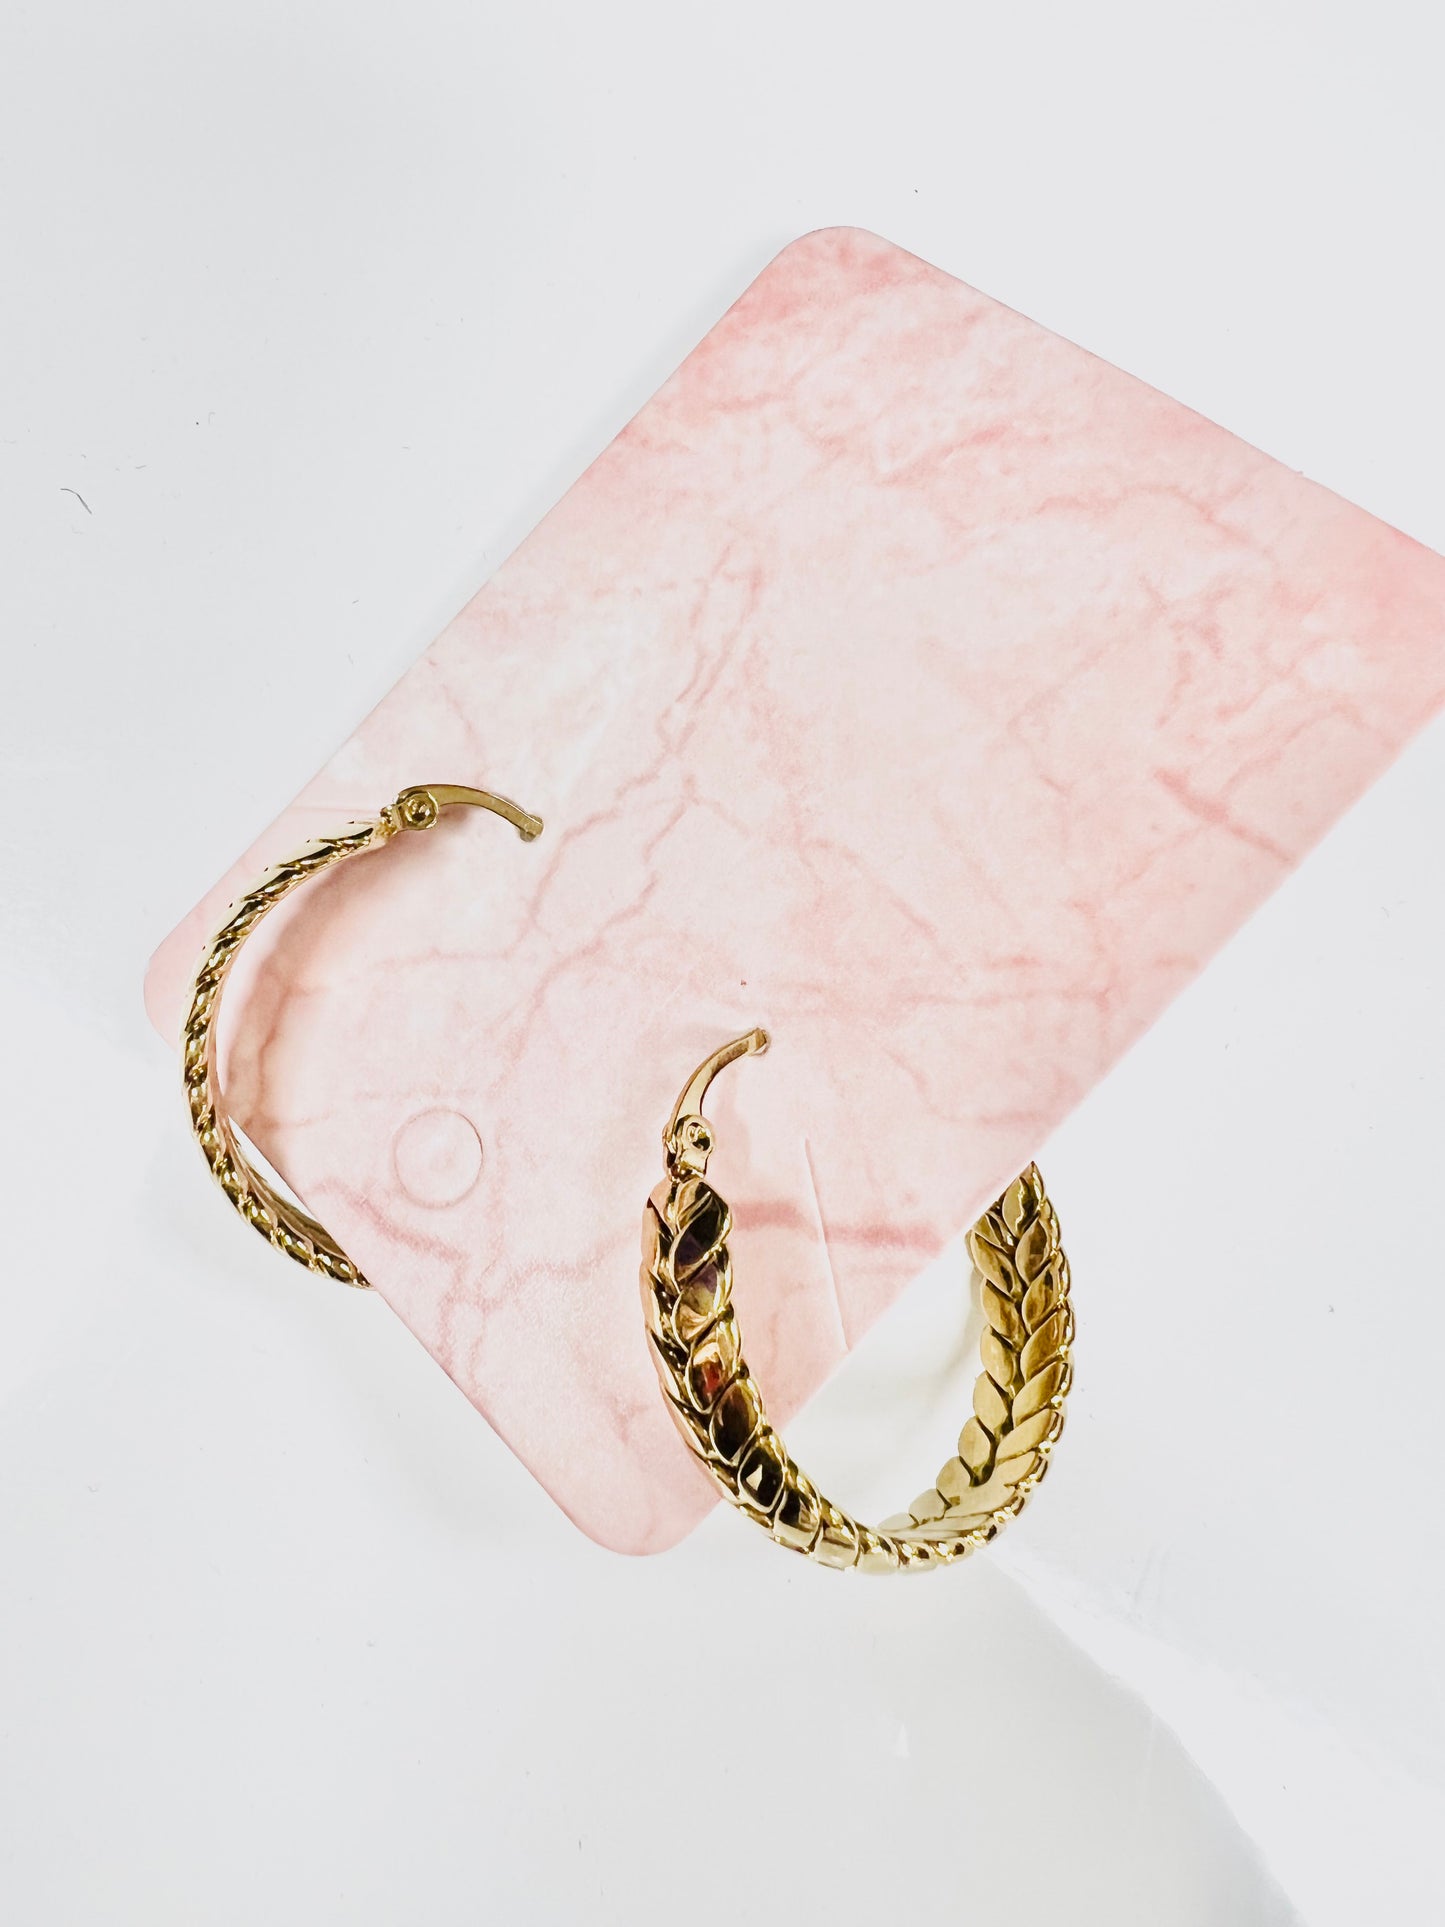 Braided Hoops (Gold, Silver) by Yomi Styling